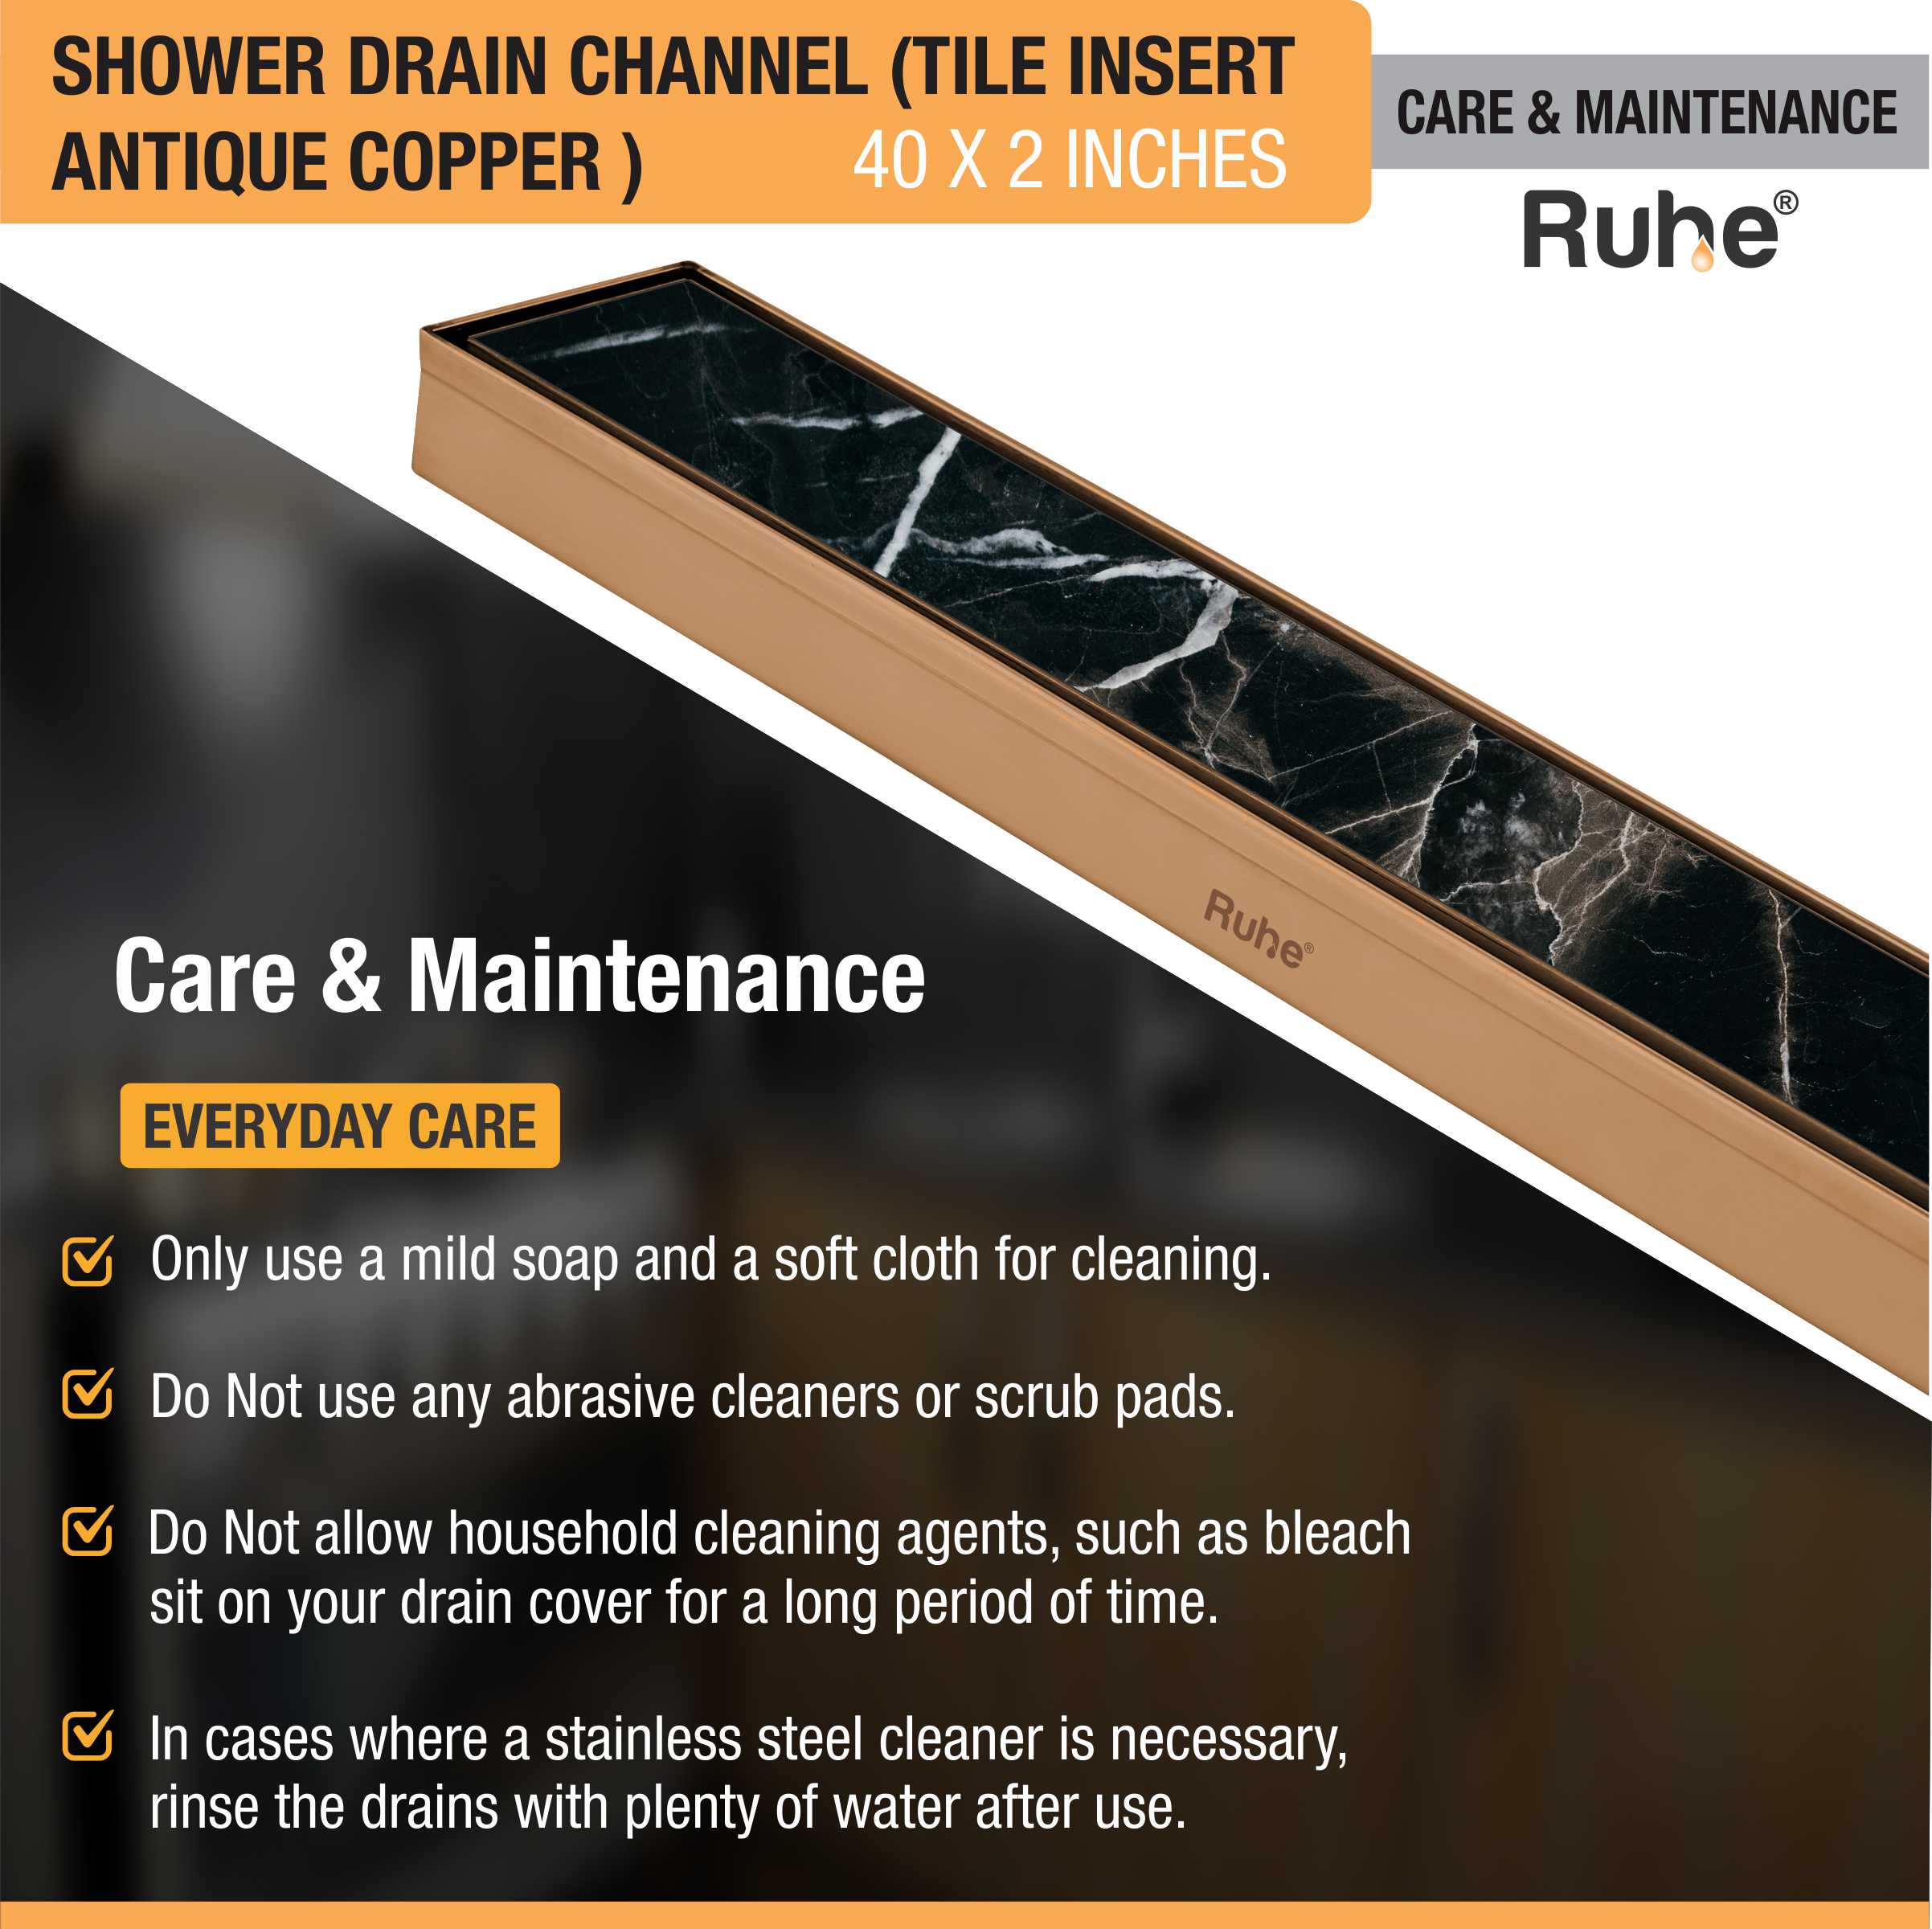 Tile Insert Shower Drain Channel (40 x 2 Inches)ROSE GOLD/ANTIQUE COPPER care and maintenance